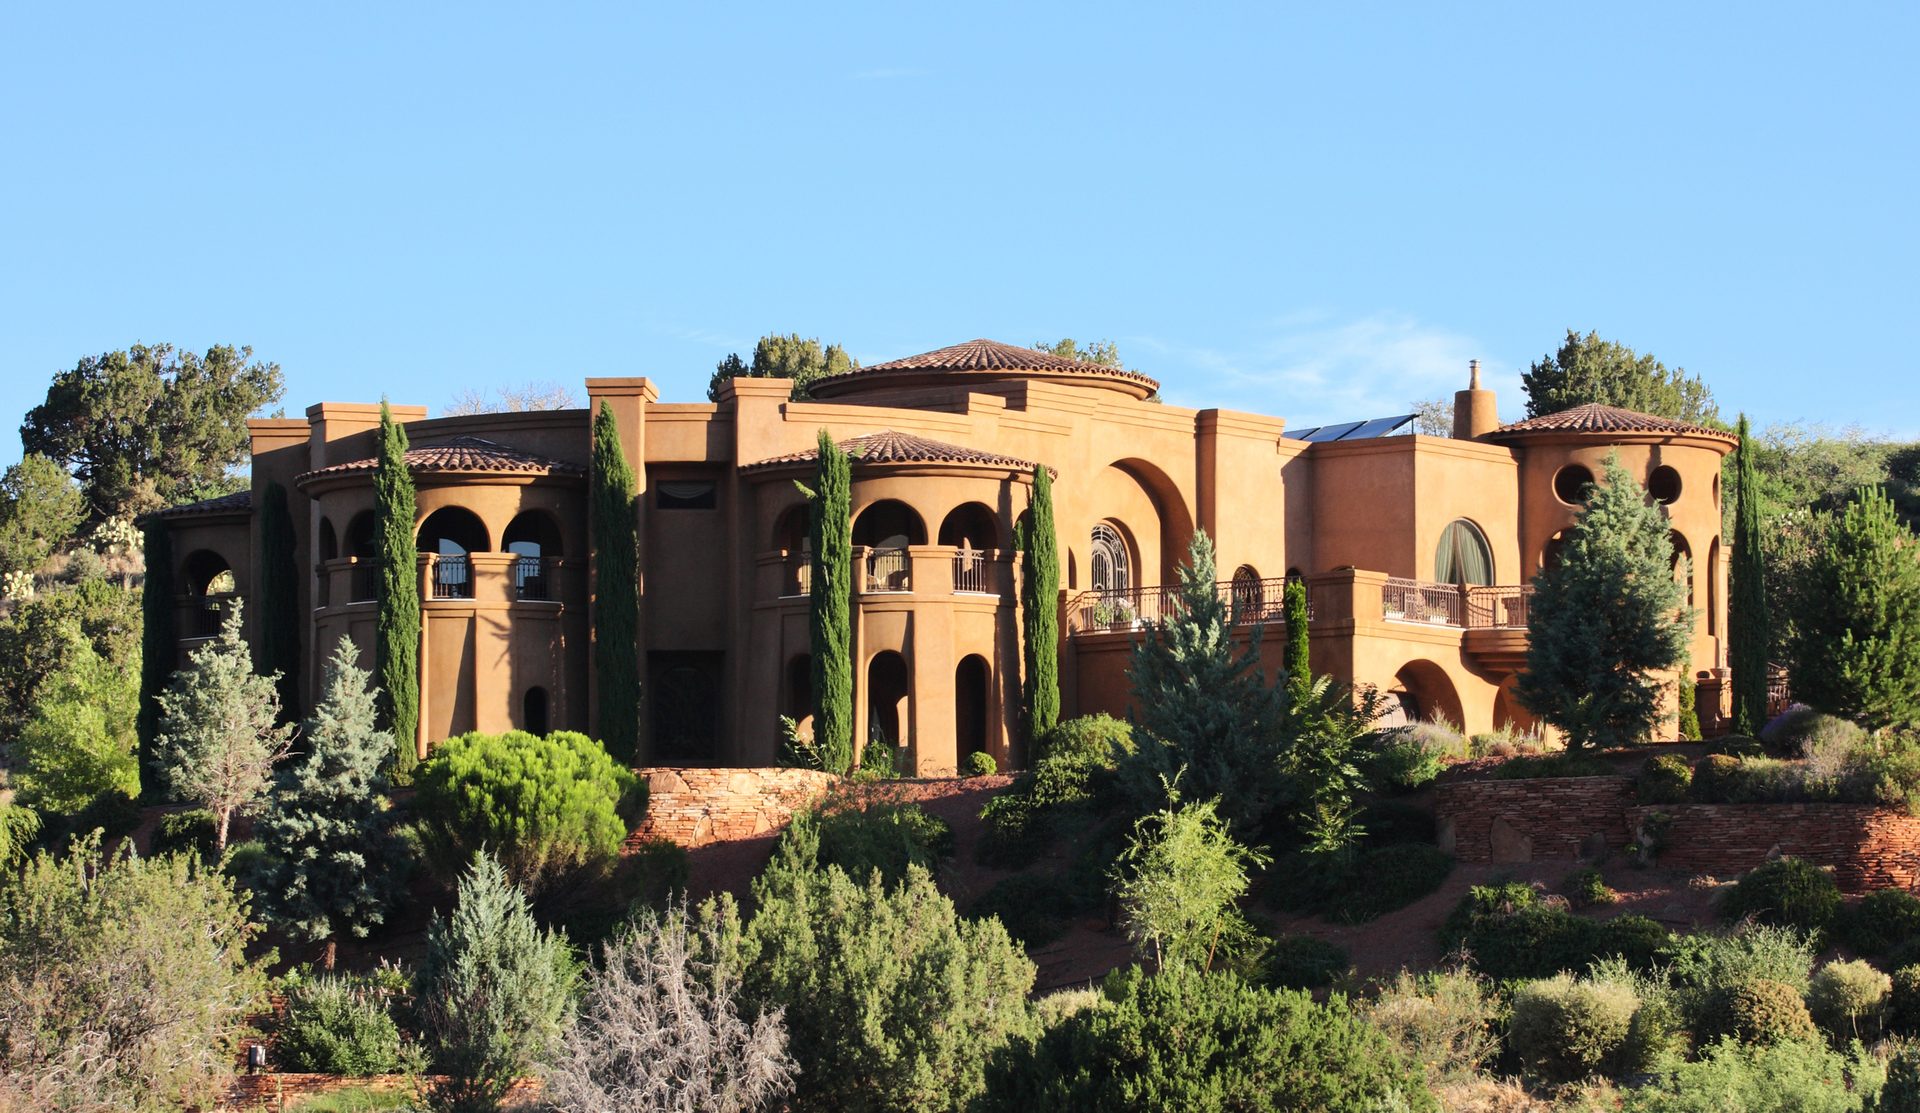 Luxury mansion built into the side of a hill with beautifully manicured desert landscape yard under a sunrise sky. Pine Valley - Sedona, Arizona,